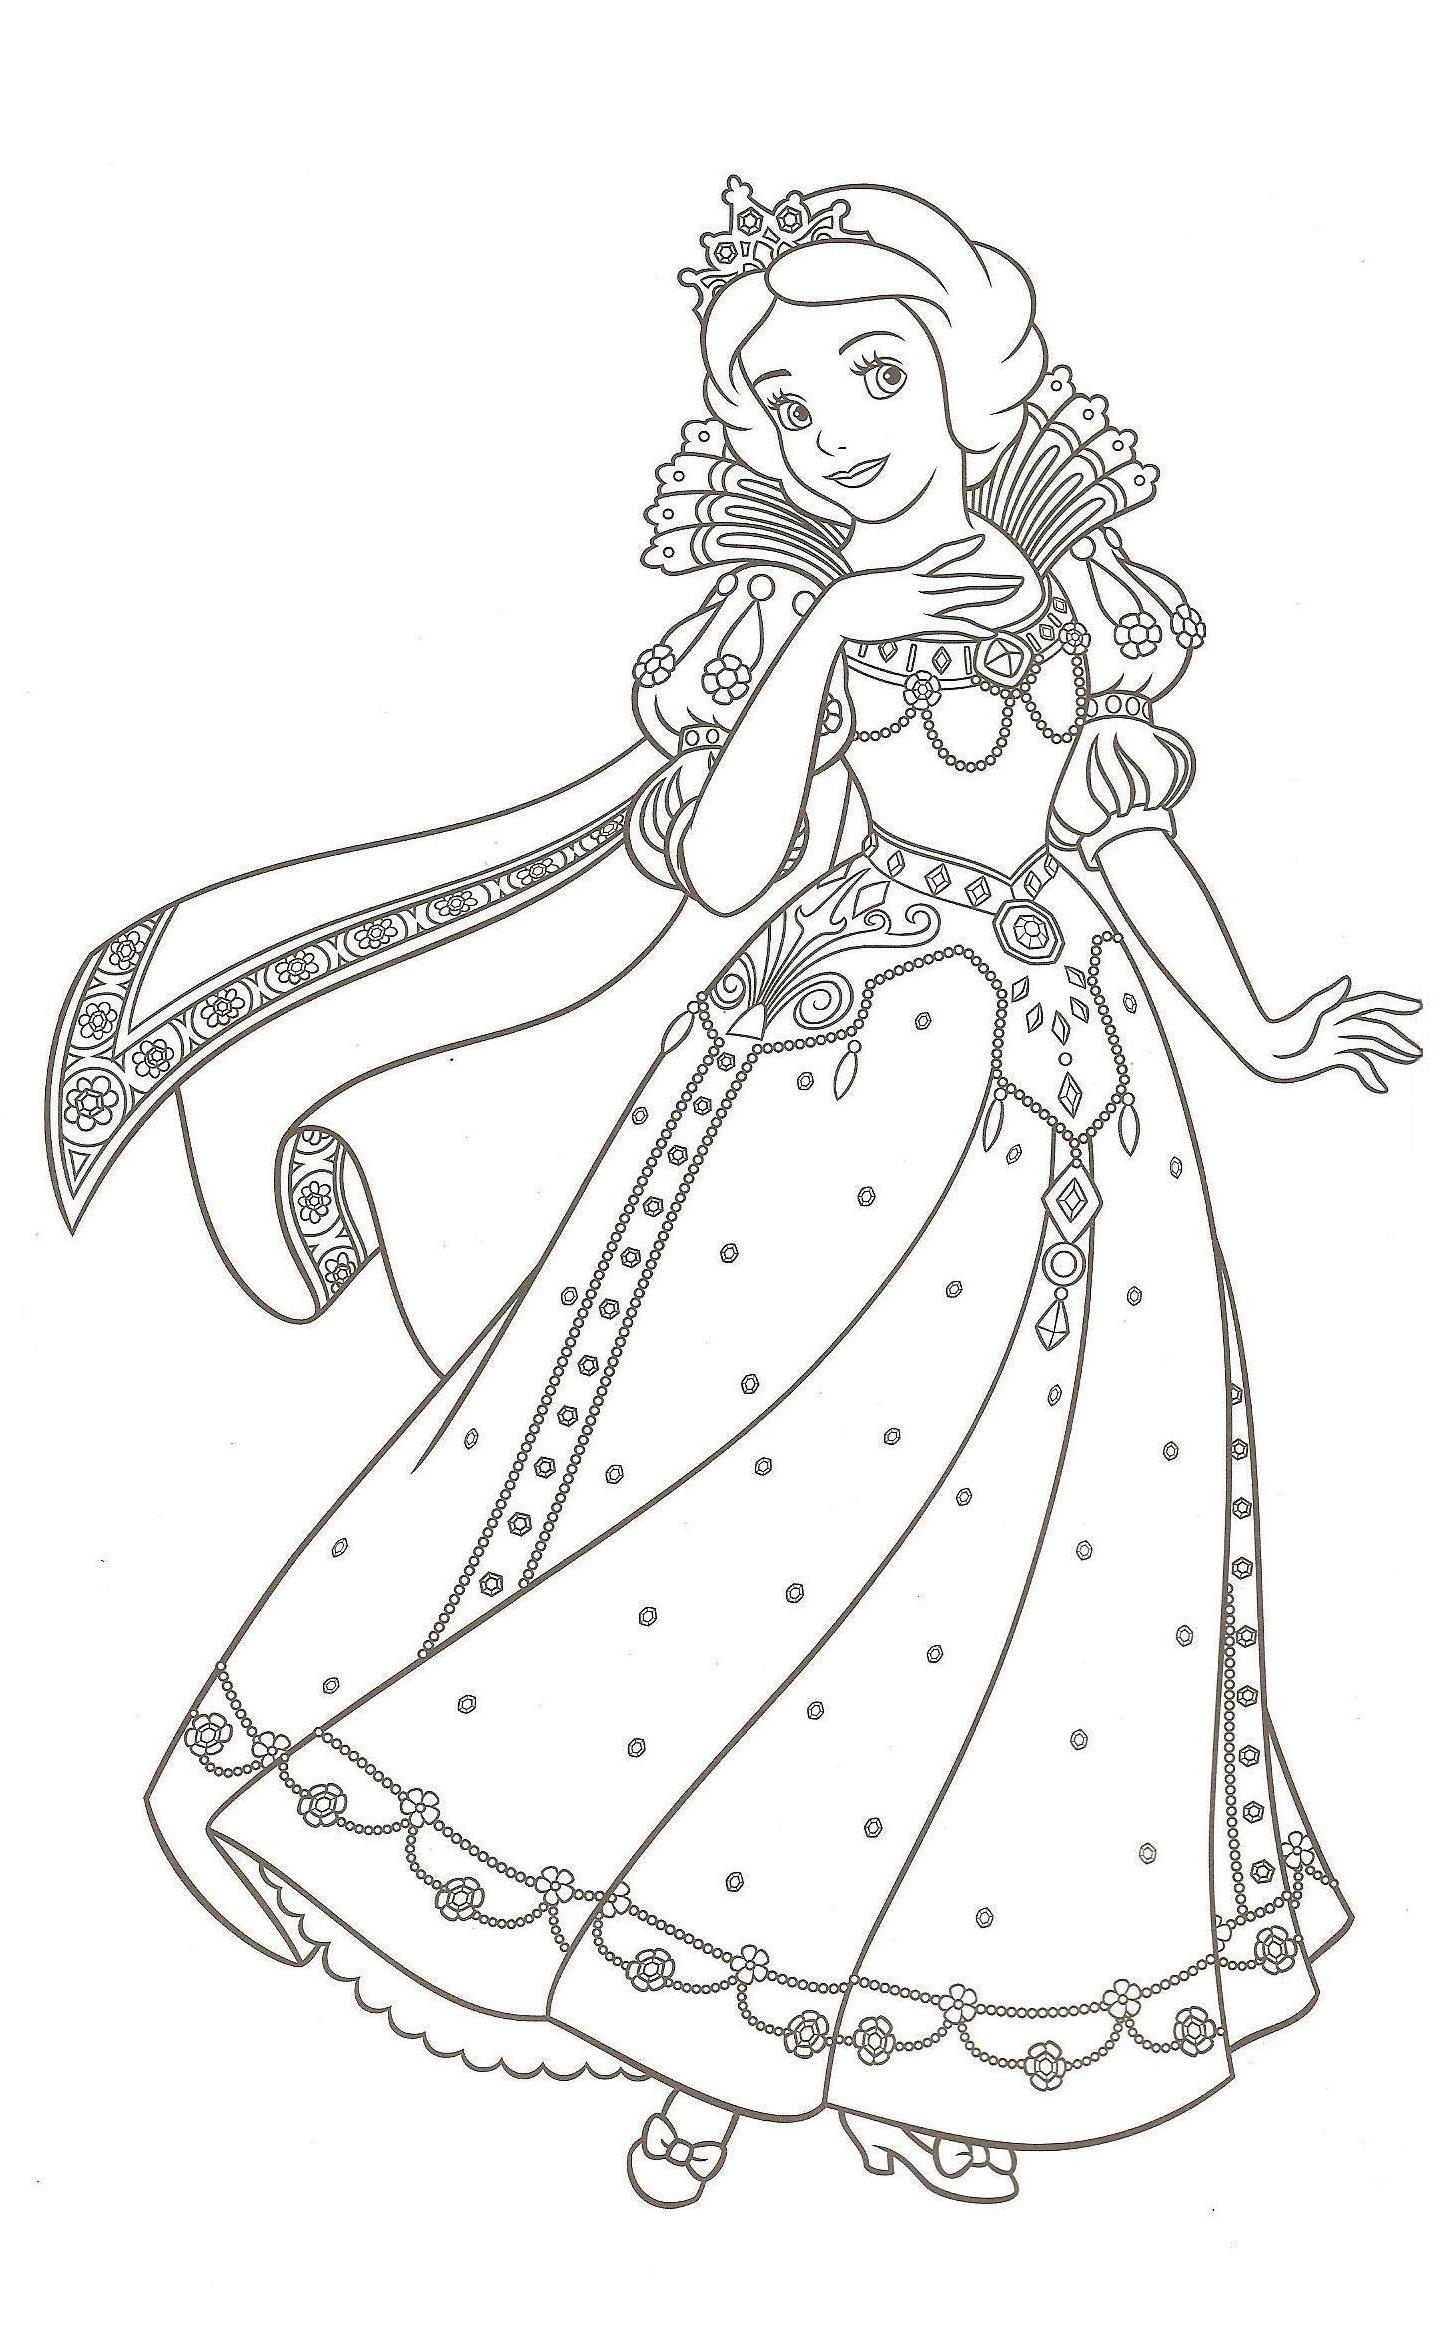 snow-white-free-to-color-for-children-snow-white-kids-coloring-pages